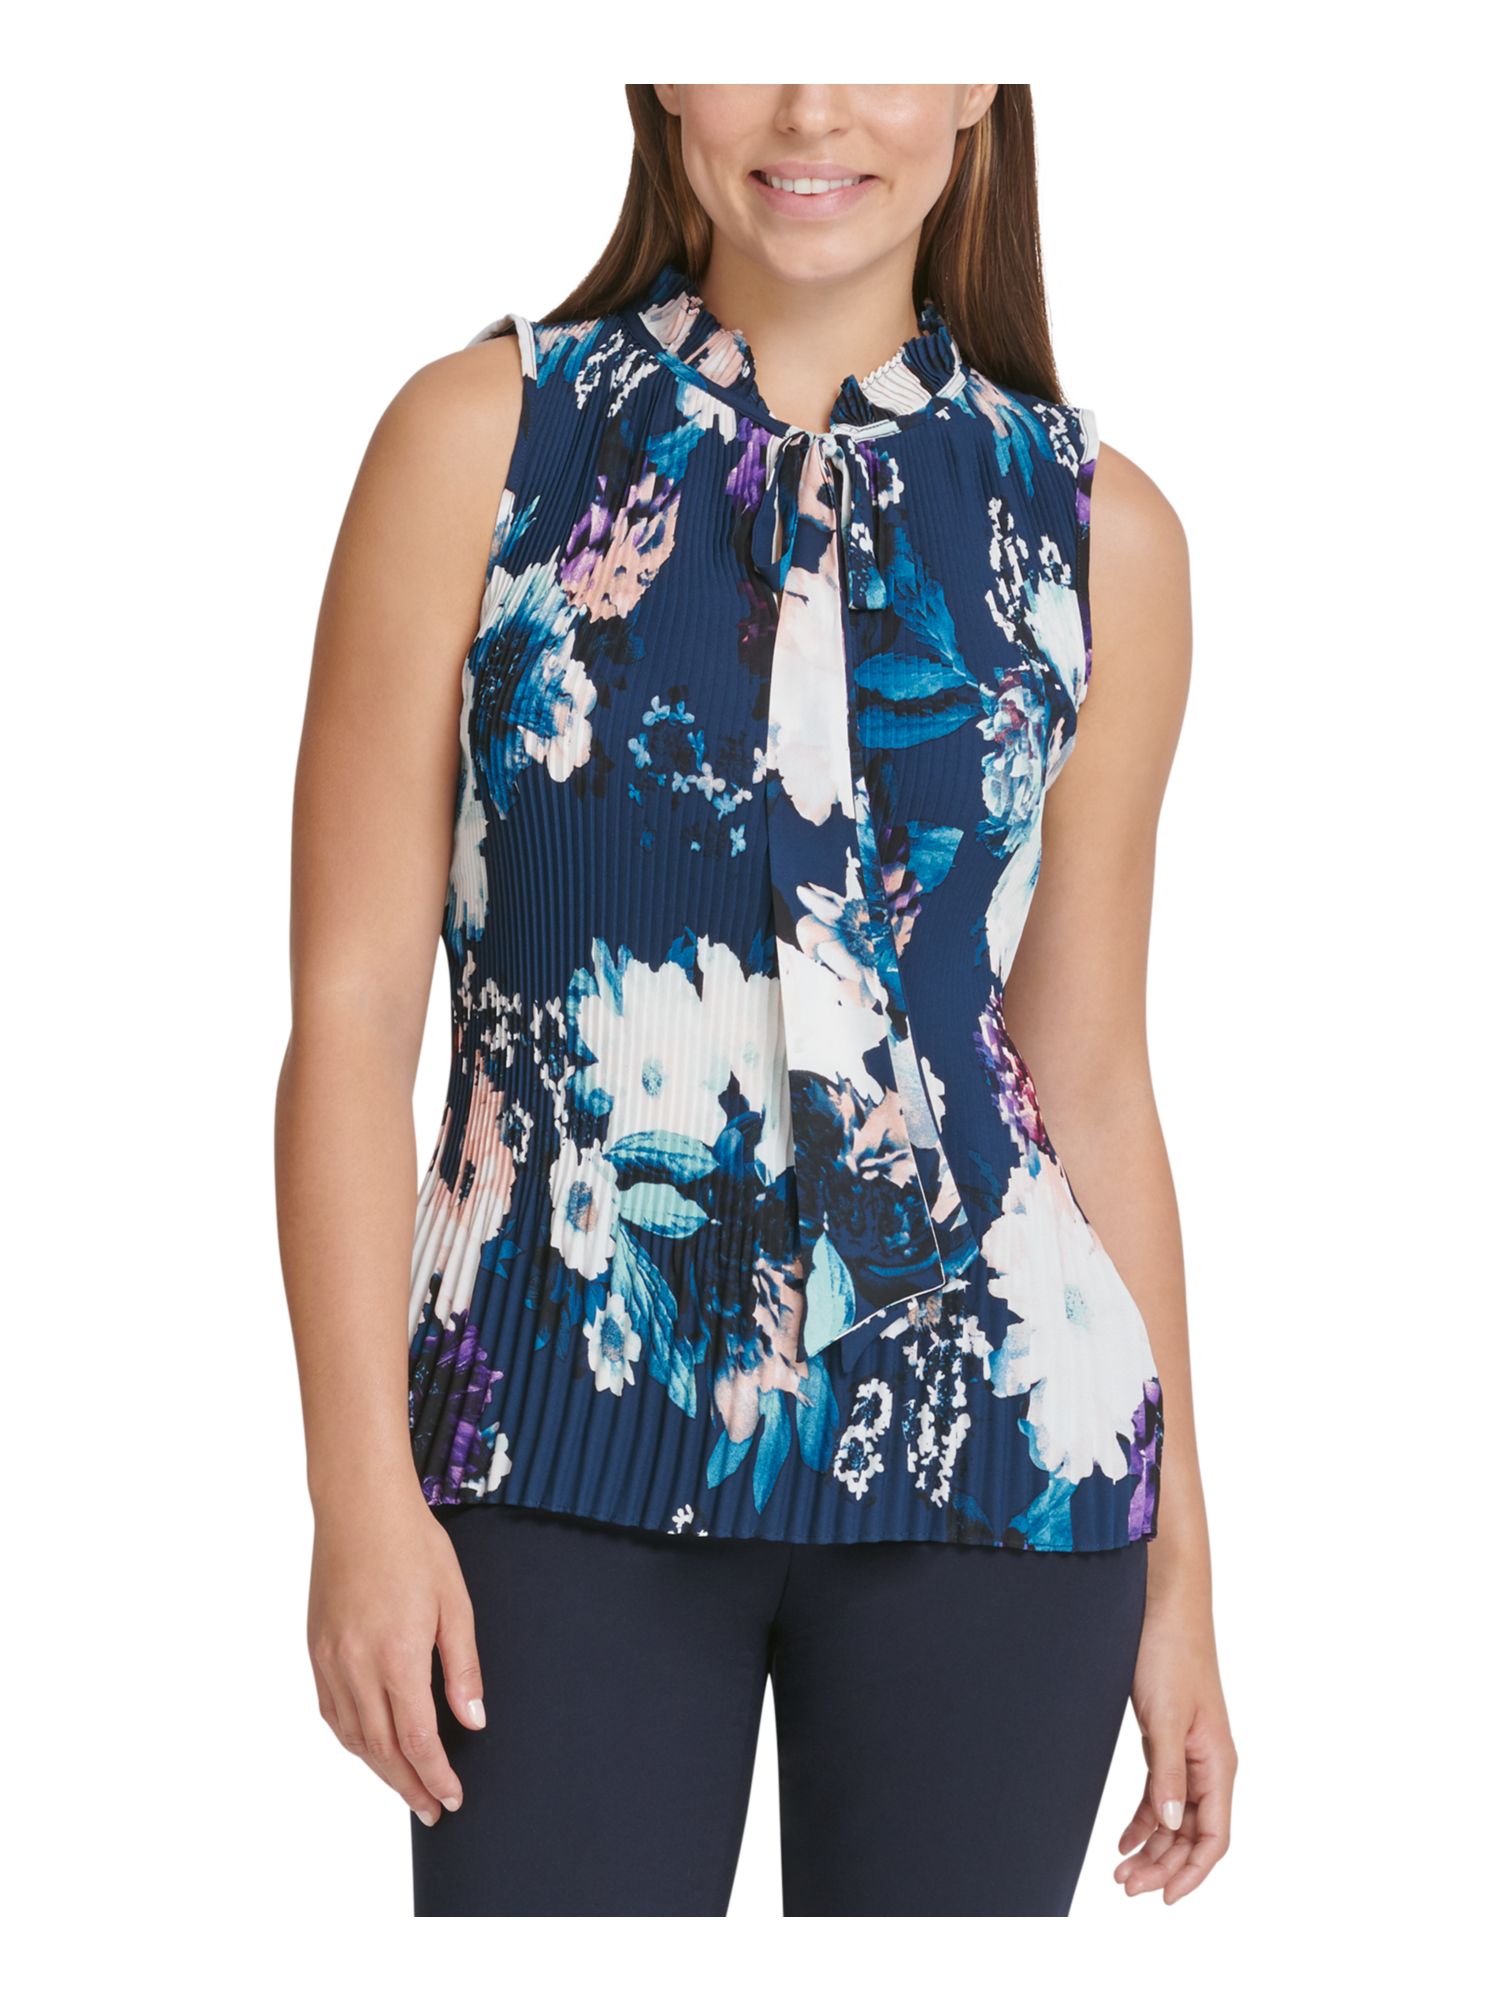 DKNY Womens Blue Pleated Printed Sleeveless Tie Neck Top Petites PM